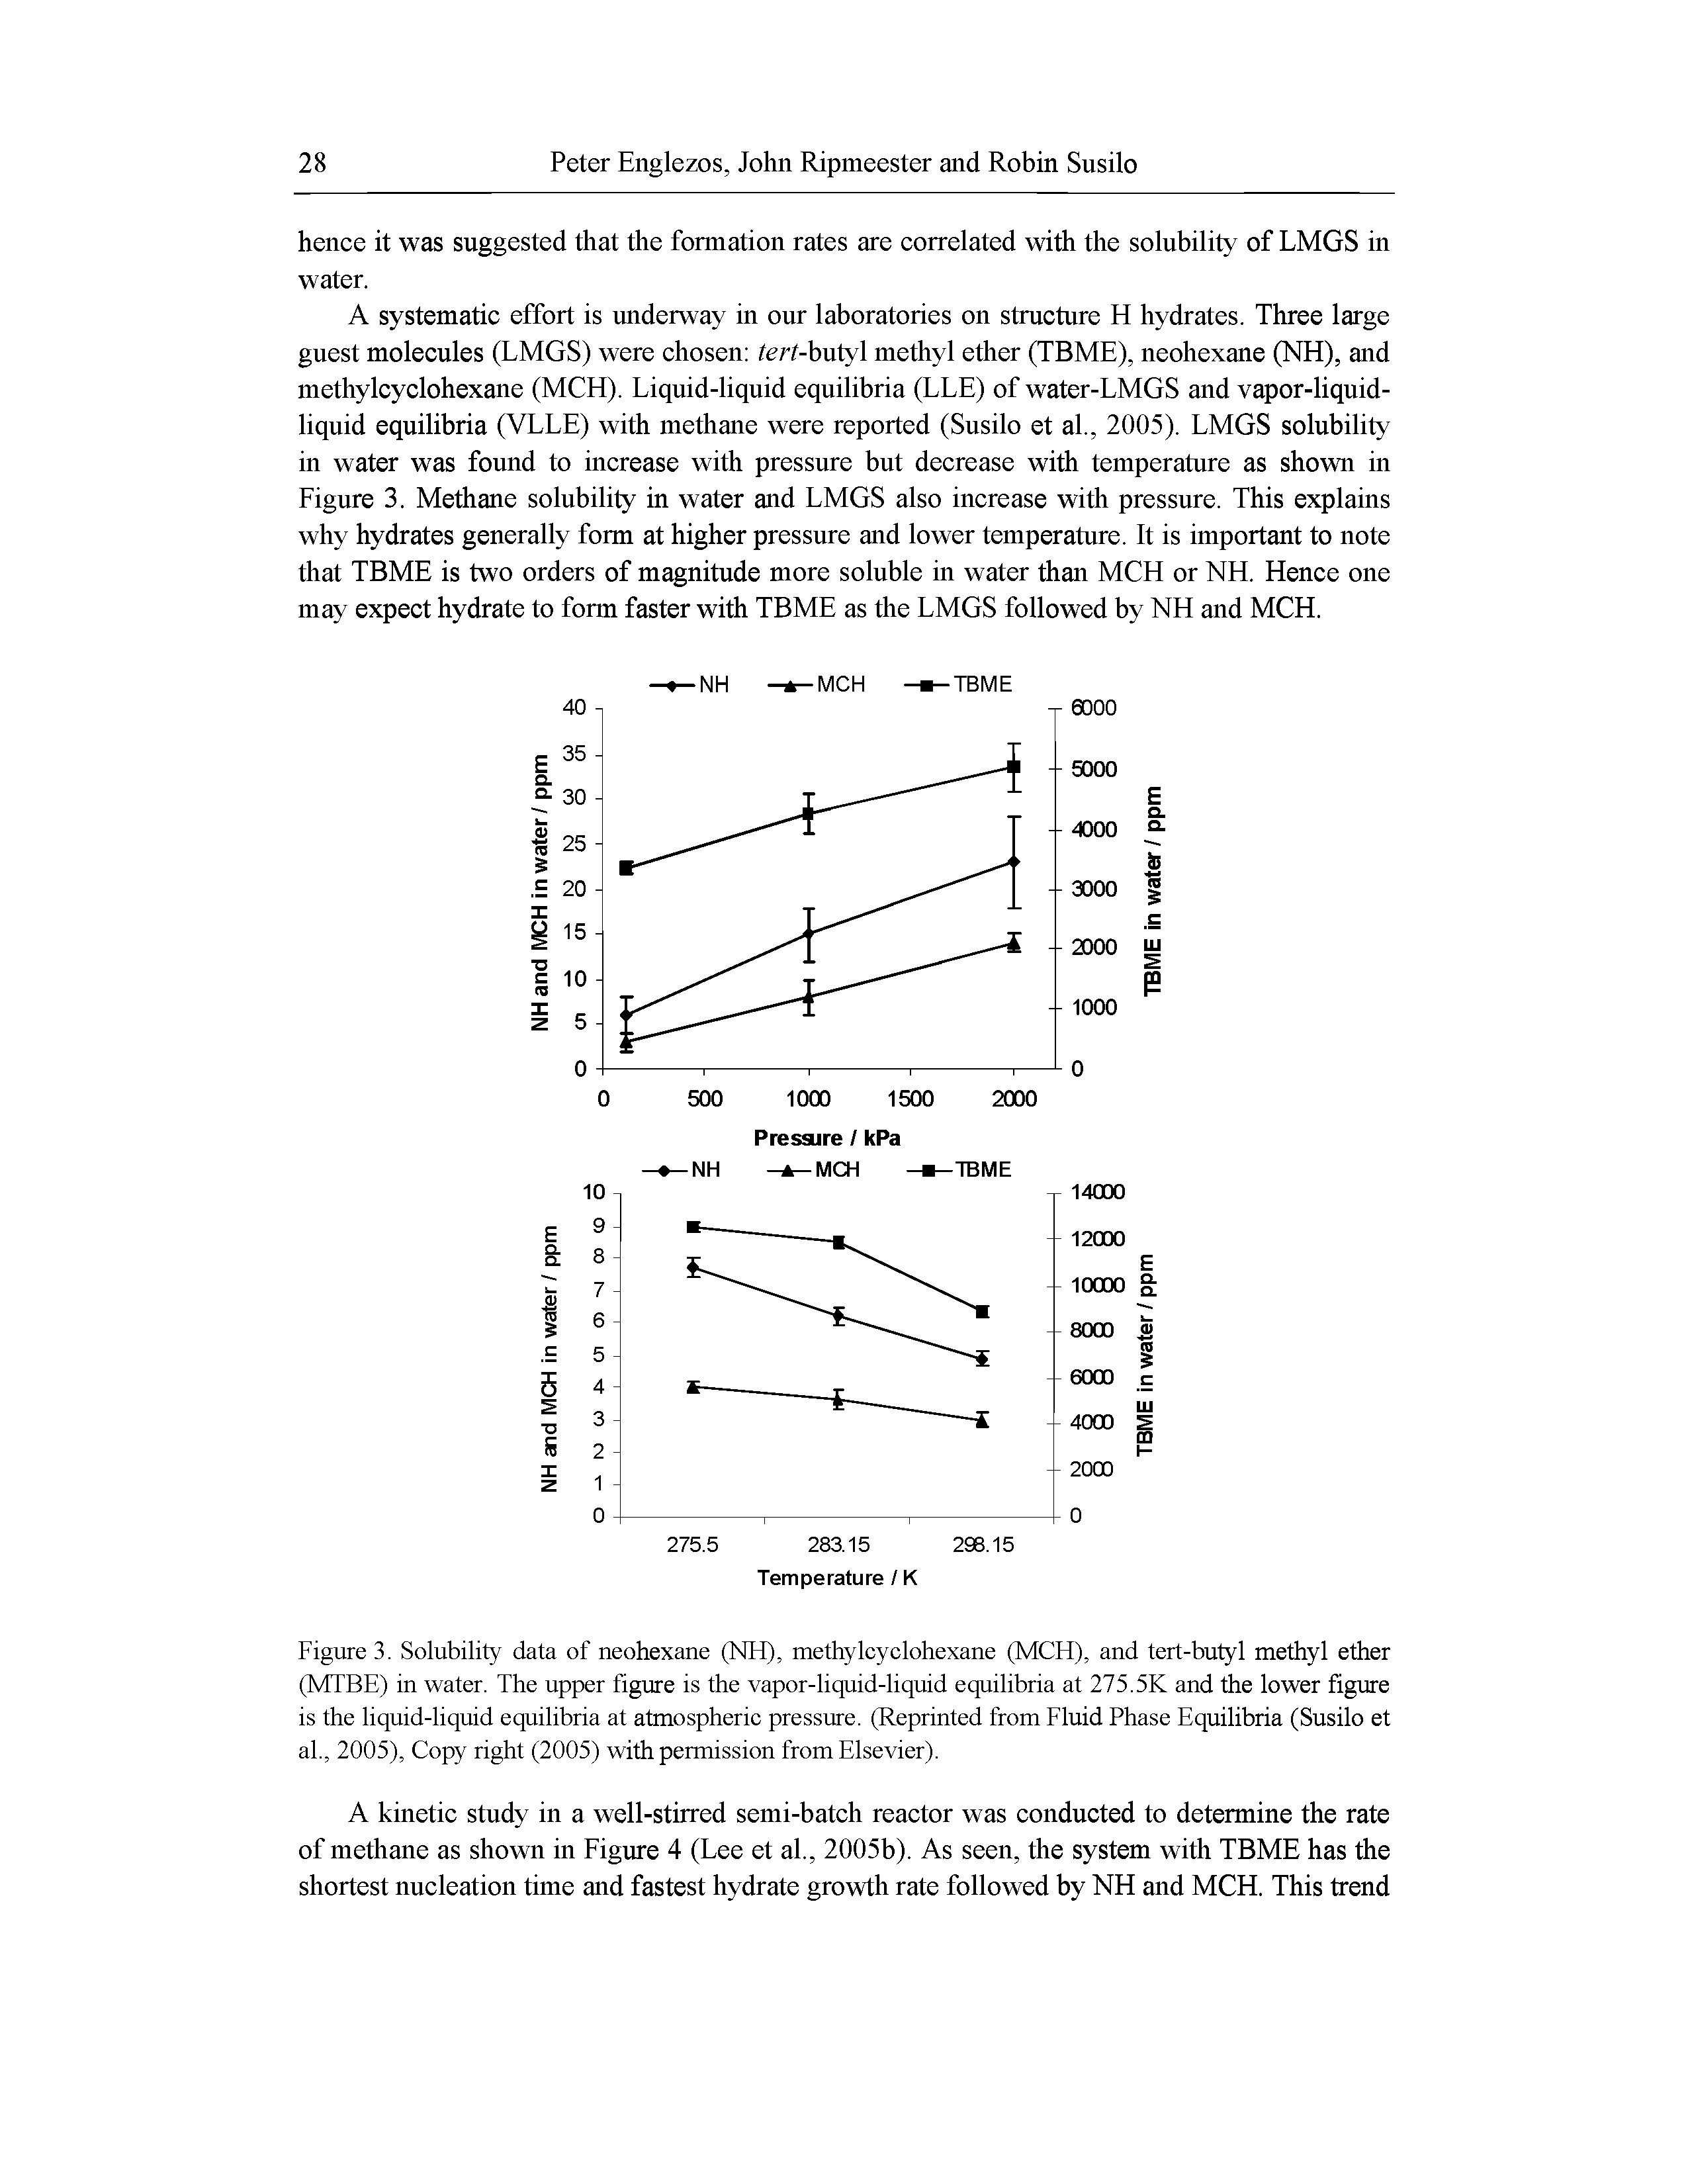 Figure 3. Solubility data of neohexane (NH), methylcyclohexane (MCH), and tert-butyl methyl ether (MTBE) in water. The upper figure is the vapor-liquid-liquid equilibria at 275.5K and the lower figure is the liquid-liquid equilibria at atmospheric pressure. (Reprinted from Fluid Phase Equilibria (Susilo et al., 2005), Copy right (2005) with permission from Elsevier).